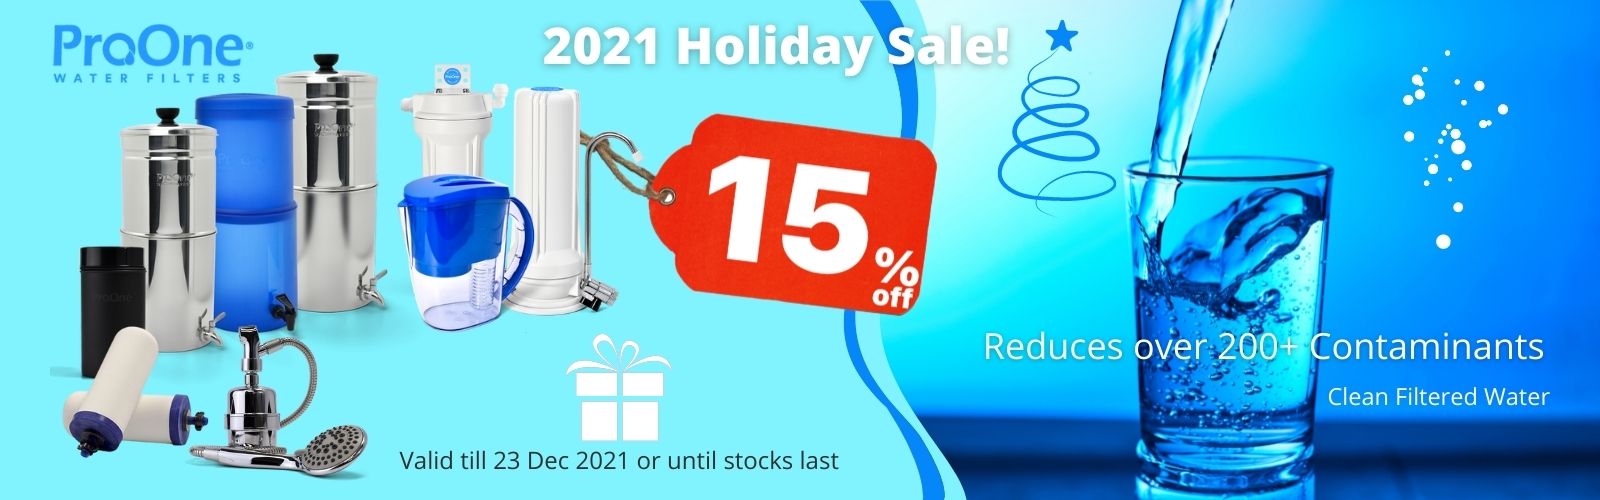 ProOne Water Filters Holiday Sale